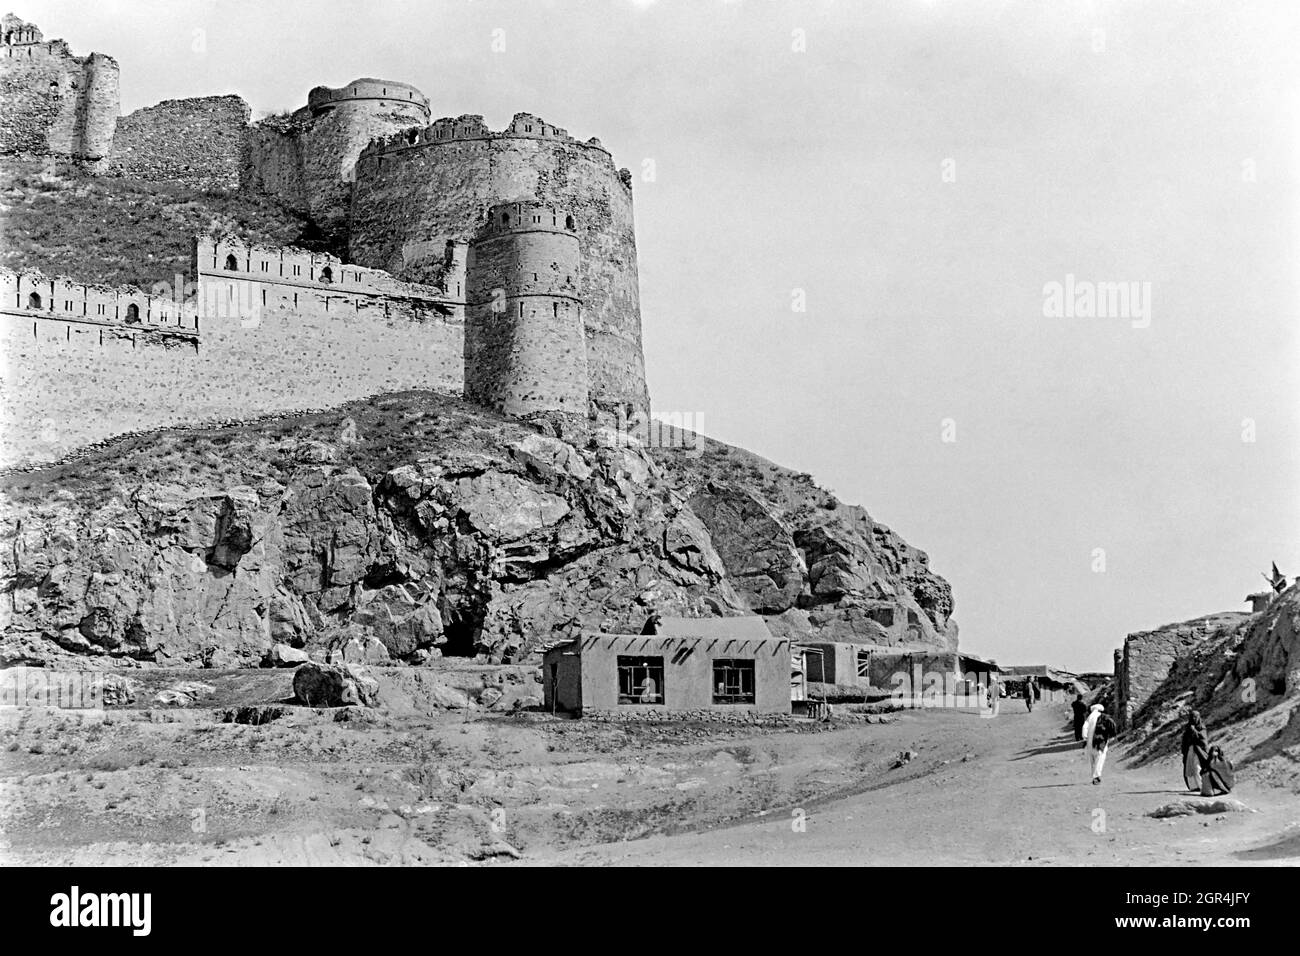 KABUL, AFGHANISTAN. 14th April 1988. Afghans walk past the ruins of the ancient 5th century, Bala Hissar fortress on the Kuh-e-Sherdarwaza Mountain April 14, 1988 in Kabul, Afghanistan. Stock Photo